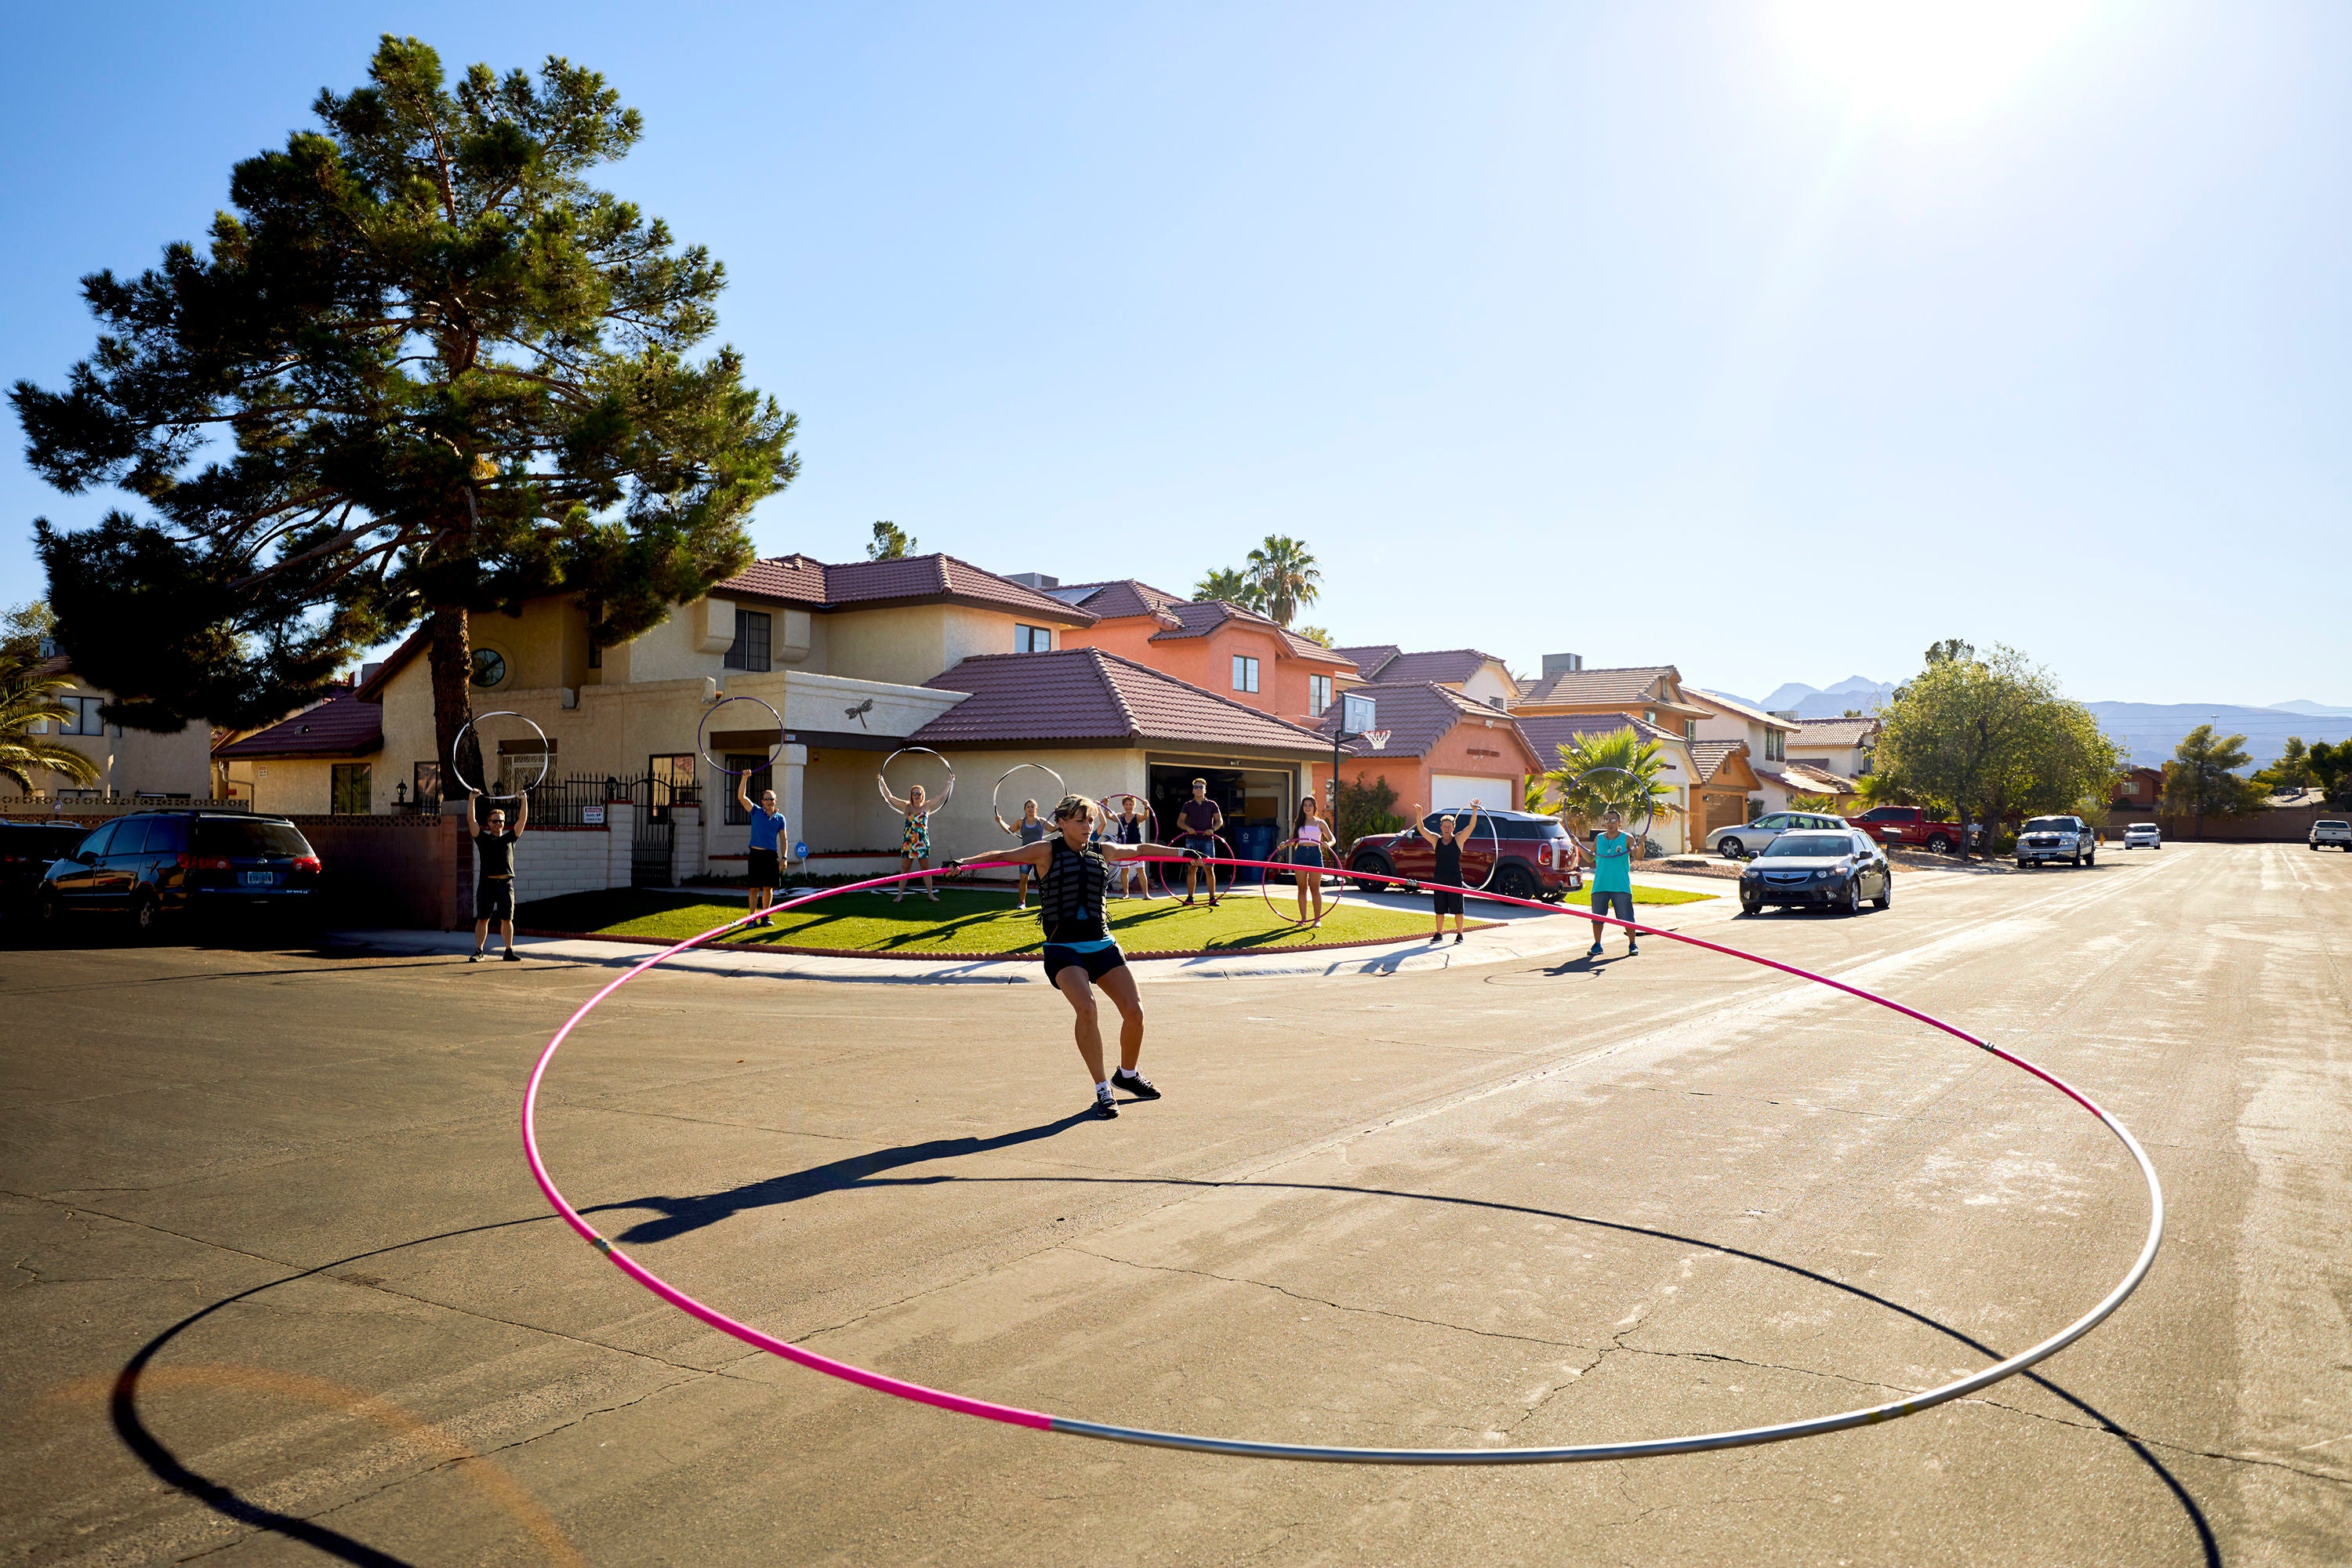 File: Getti Kehayova has an entry in the Guinness World Records 2020 edition for Largest Hula Hoop Spun (Female)